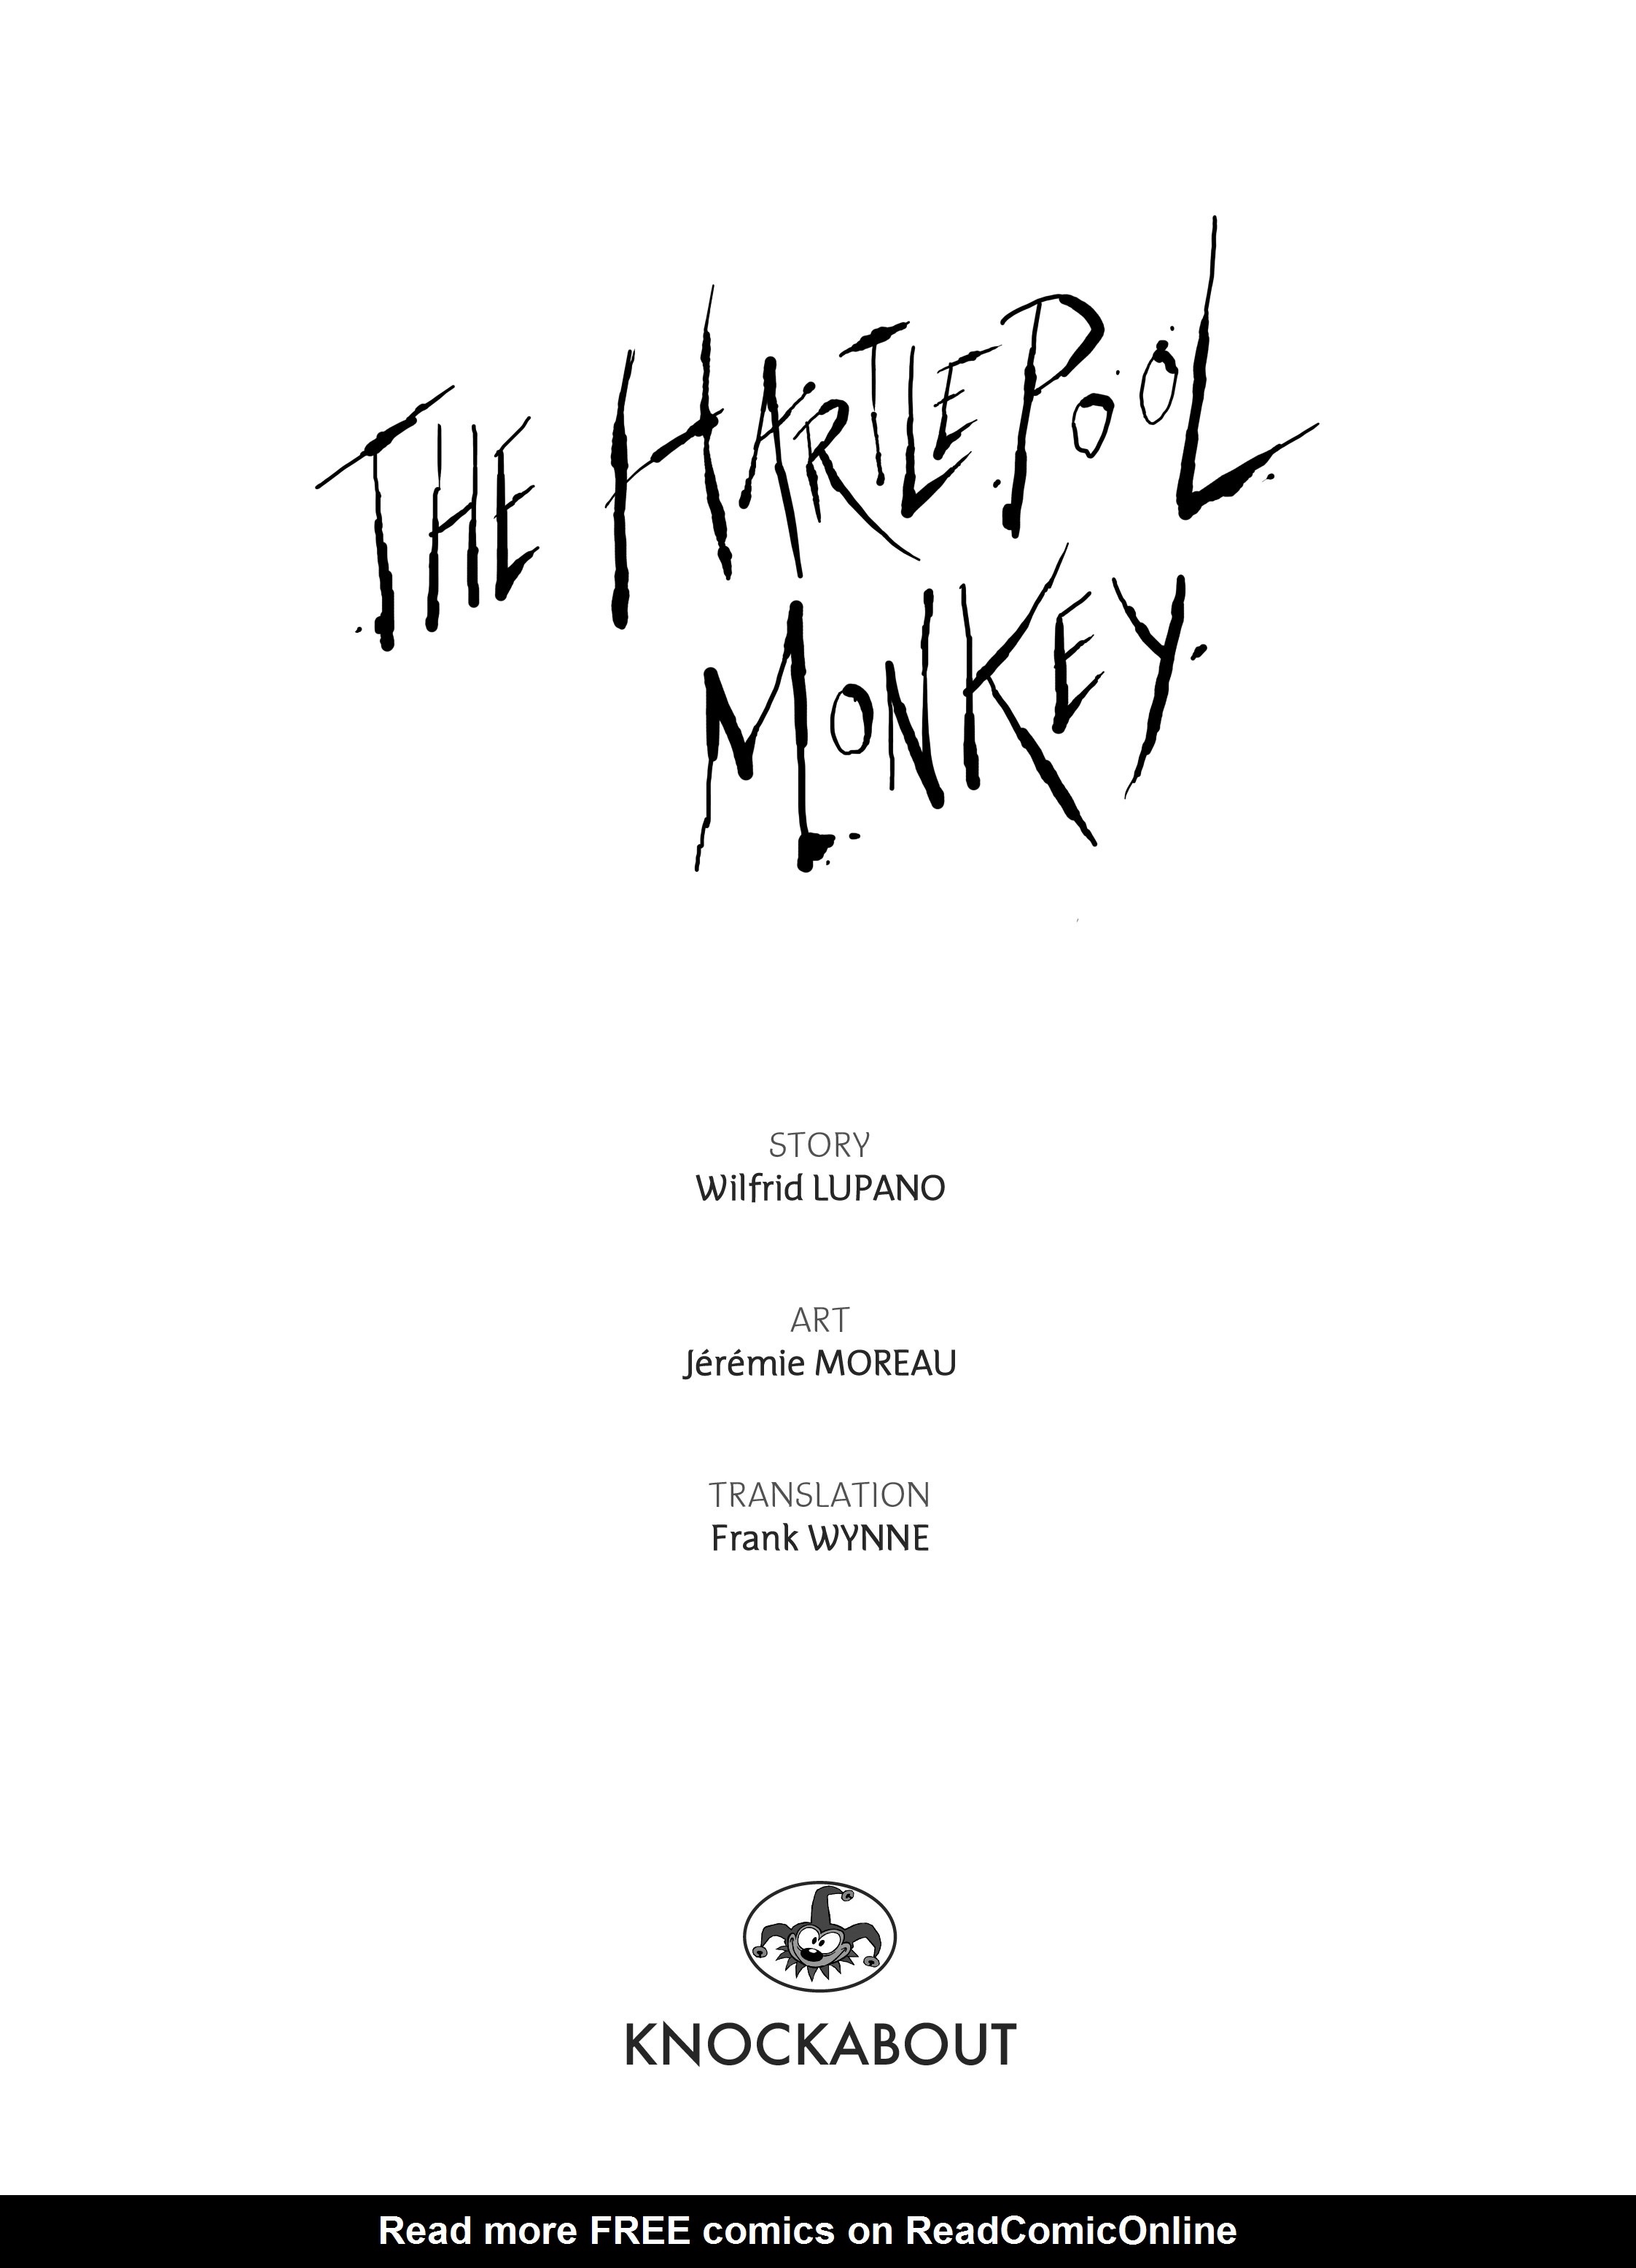 Read online The Hartlepool Monkey comic -  Issue # TPB - 2